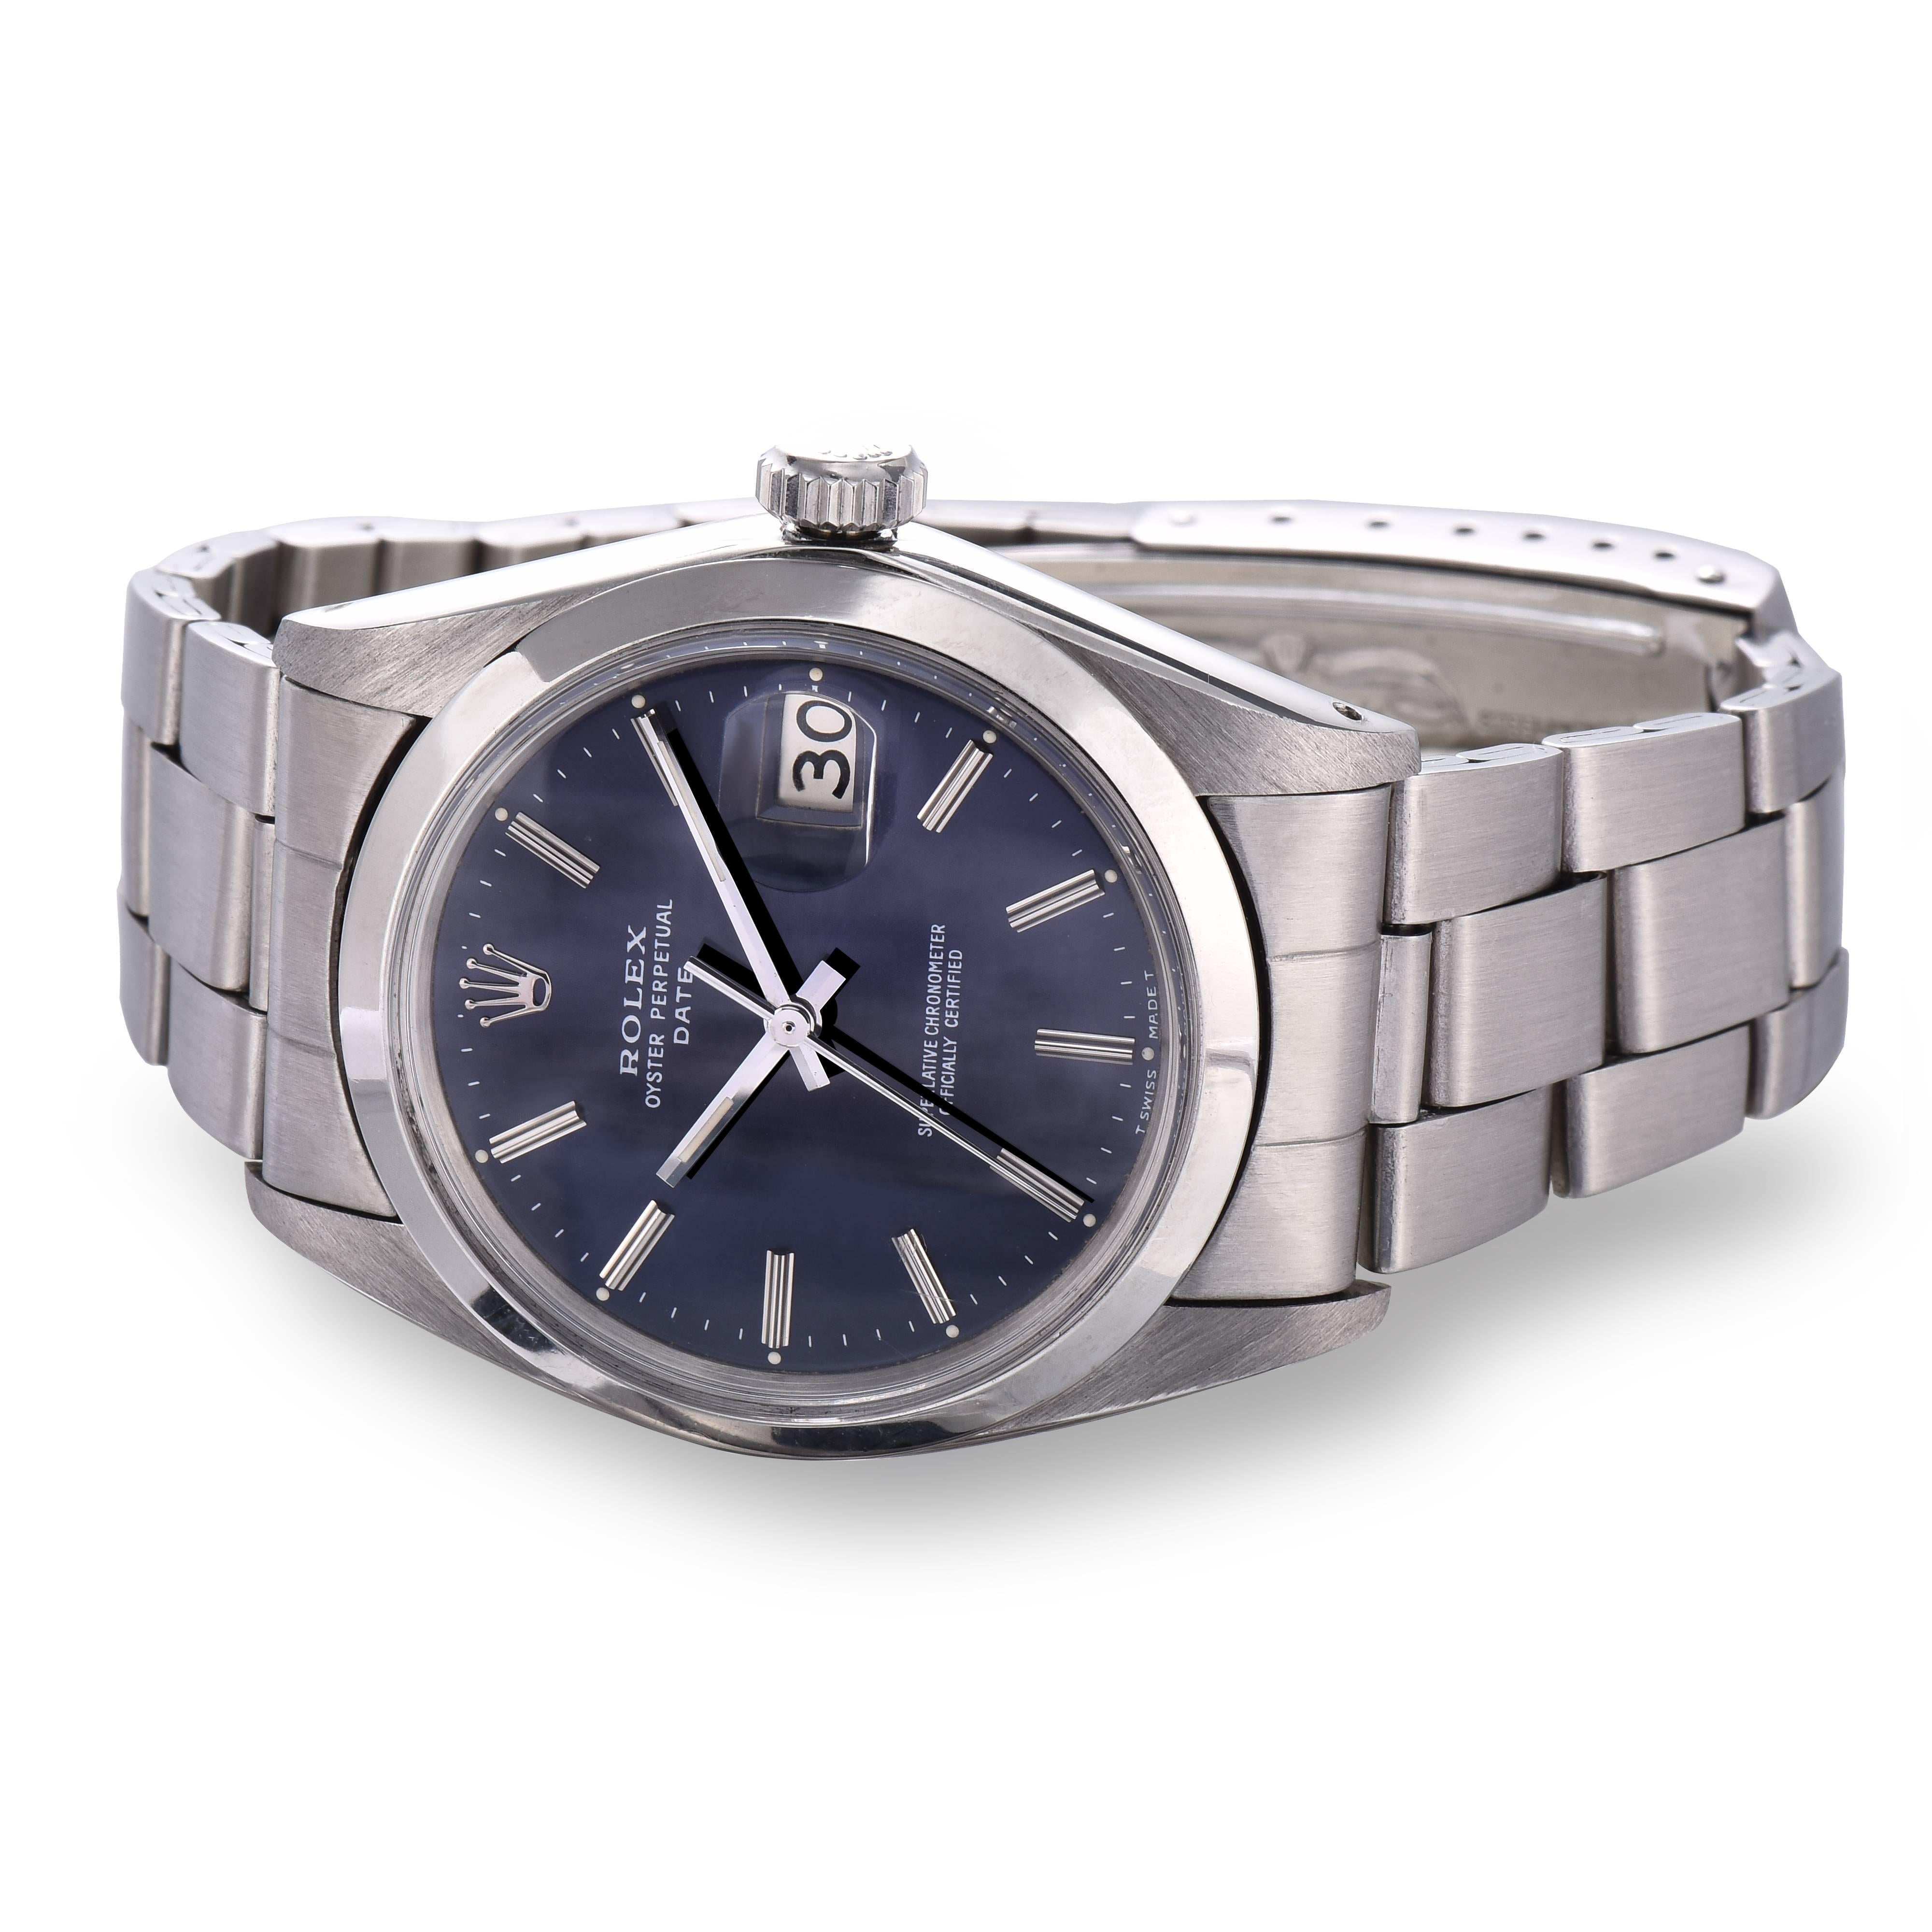 Rolex Stainless Steel Oyster Perpetual Date Watch
Dark Blue/Grey Dial with Silver Applied Hour Markers
Stainless Steel Case
34mm in Size 
Rolex Stainless Steel Screw Down Crown
Plastic Crystal
From 1968
Comes Fitted on a Rolex Stainless Rivet